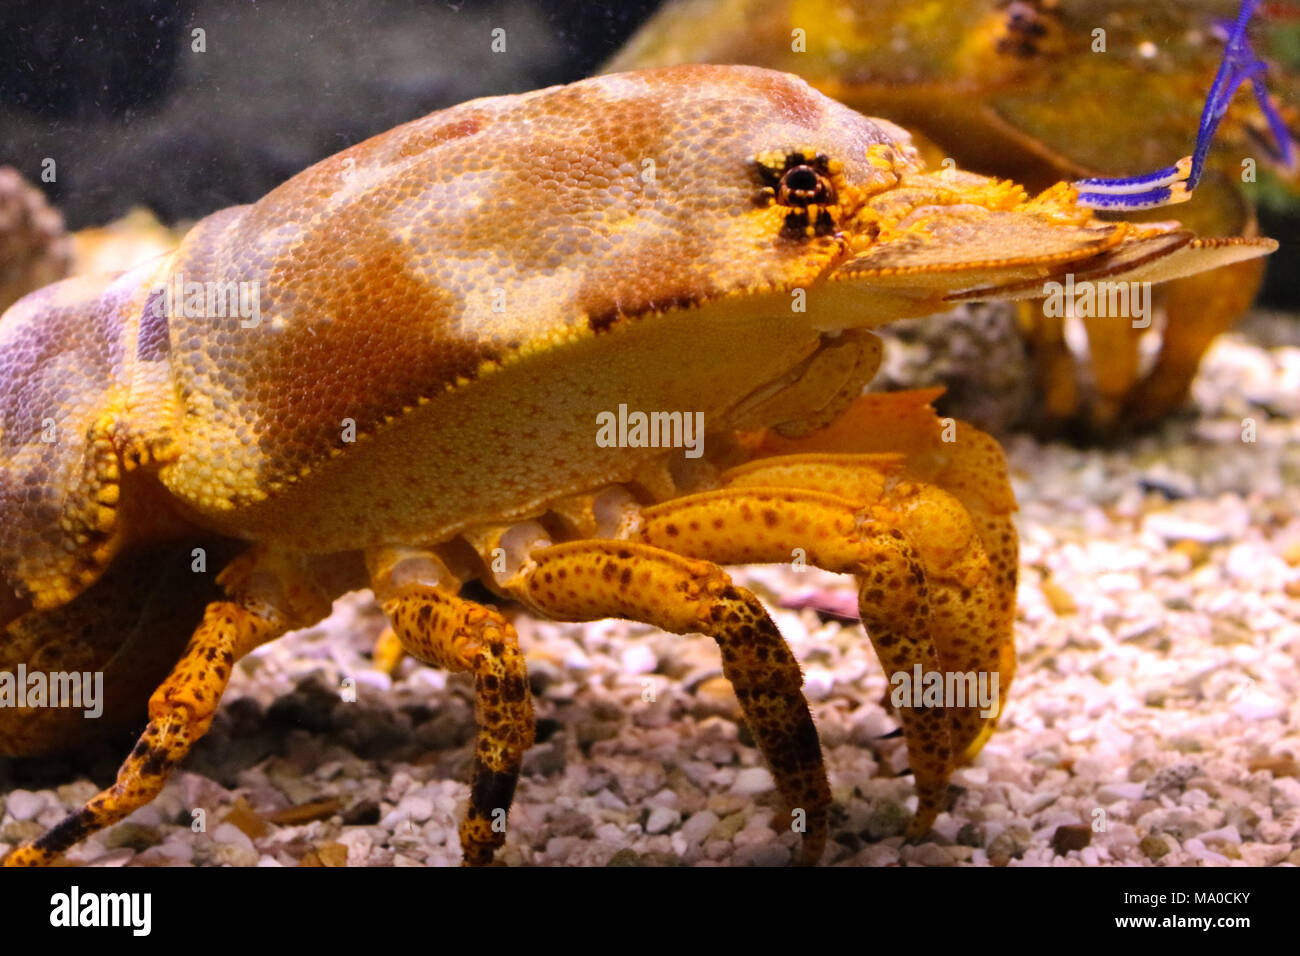 Crab, Lobster underwater in the sea Stock Photo